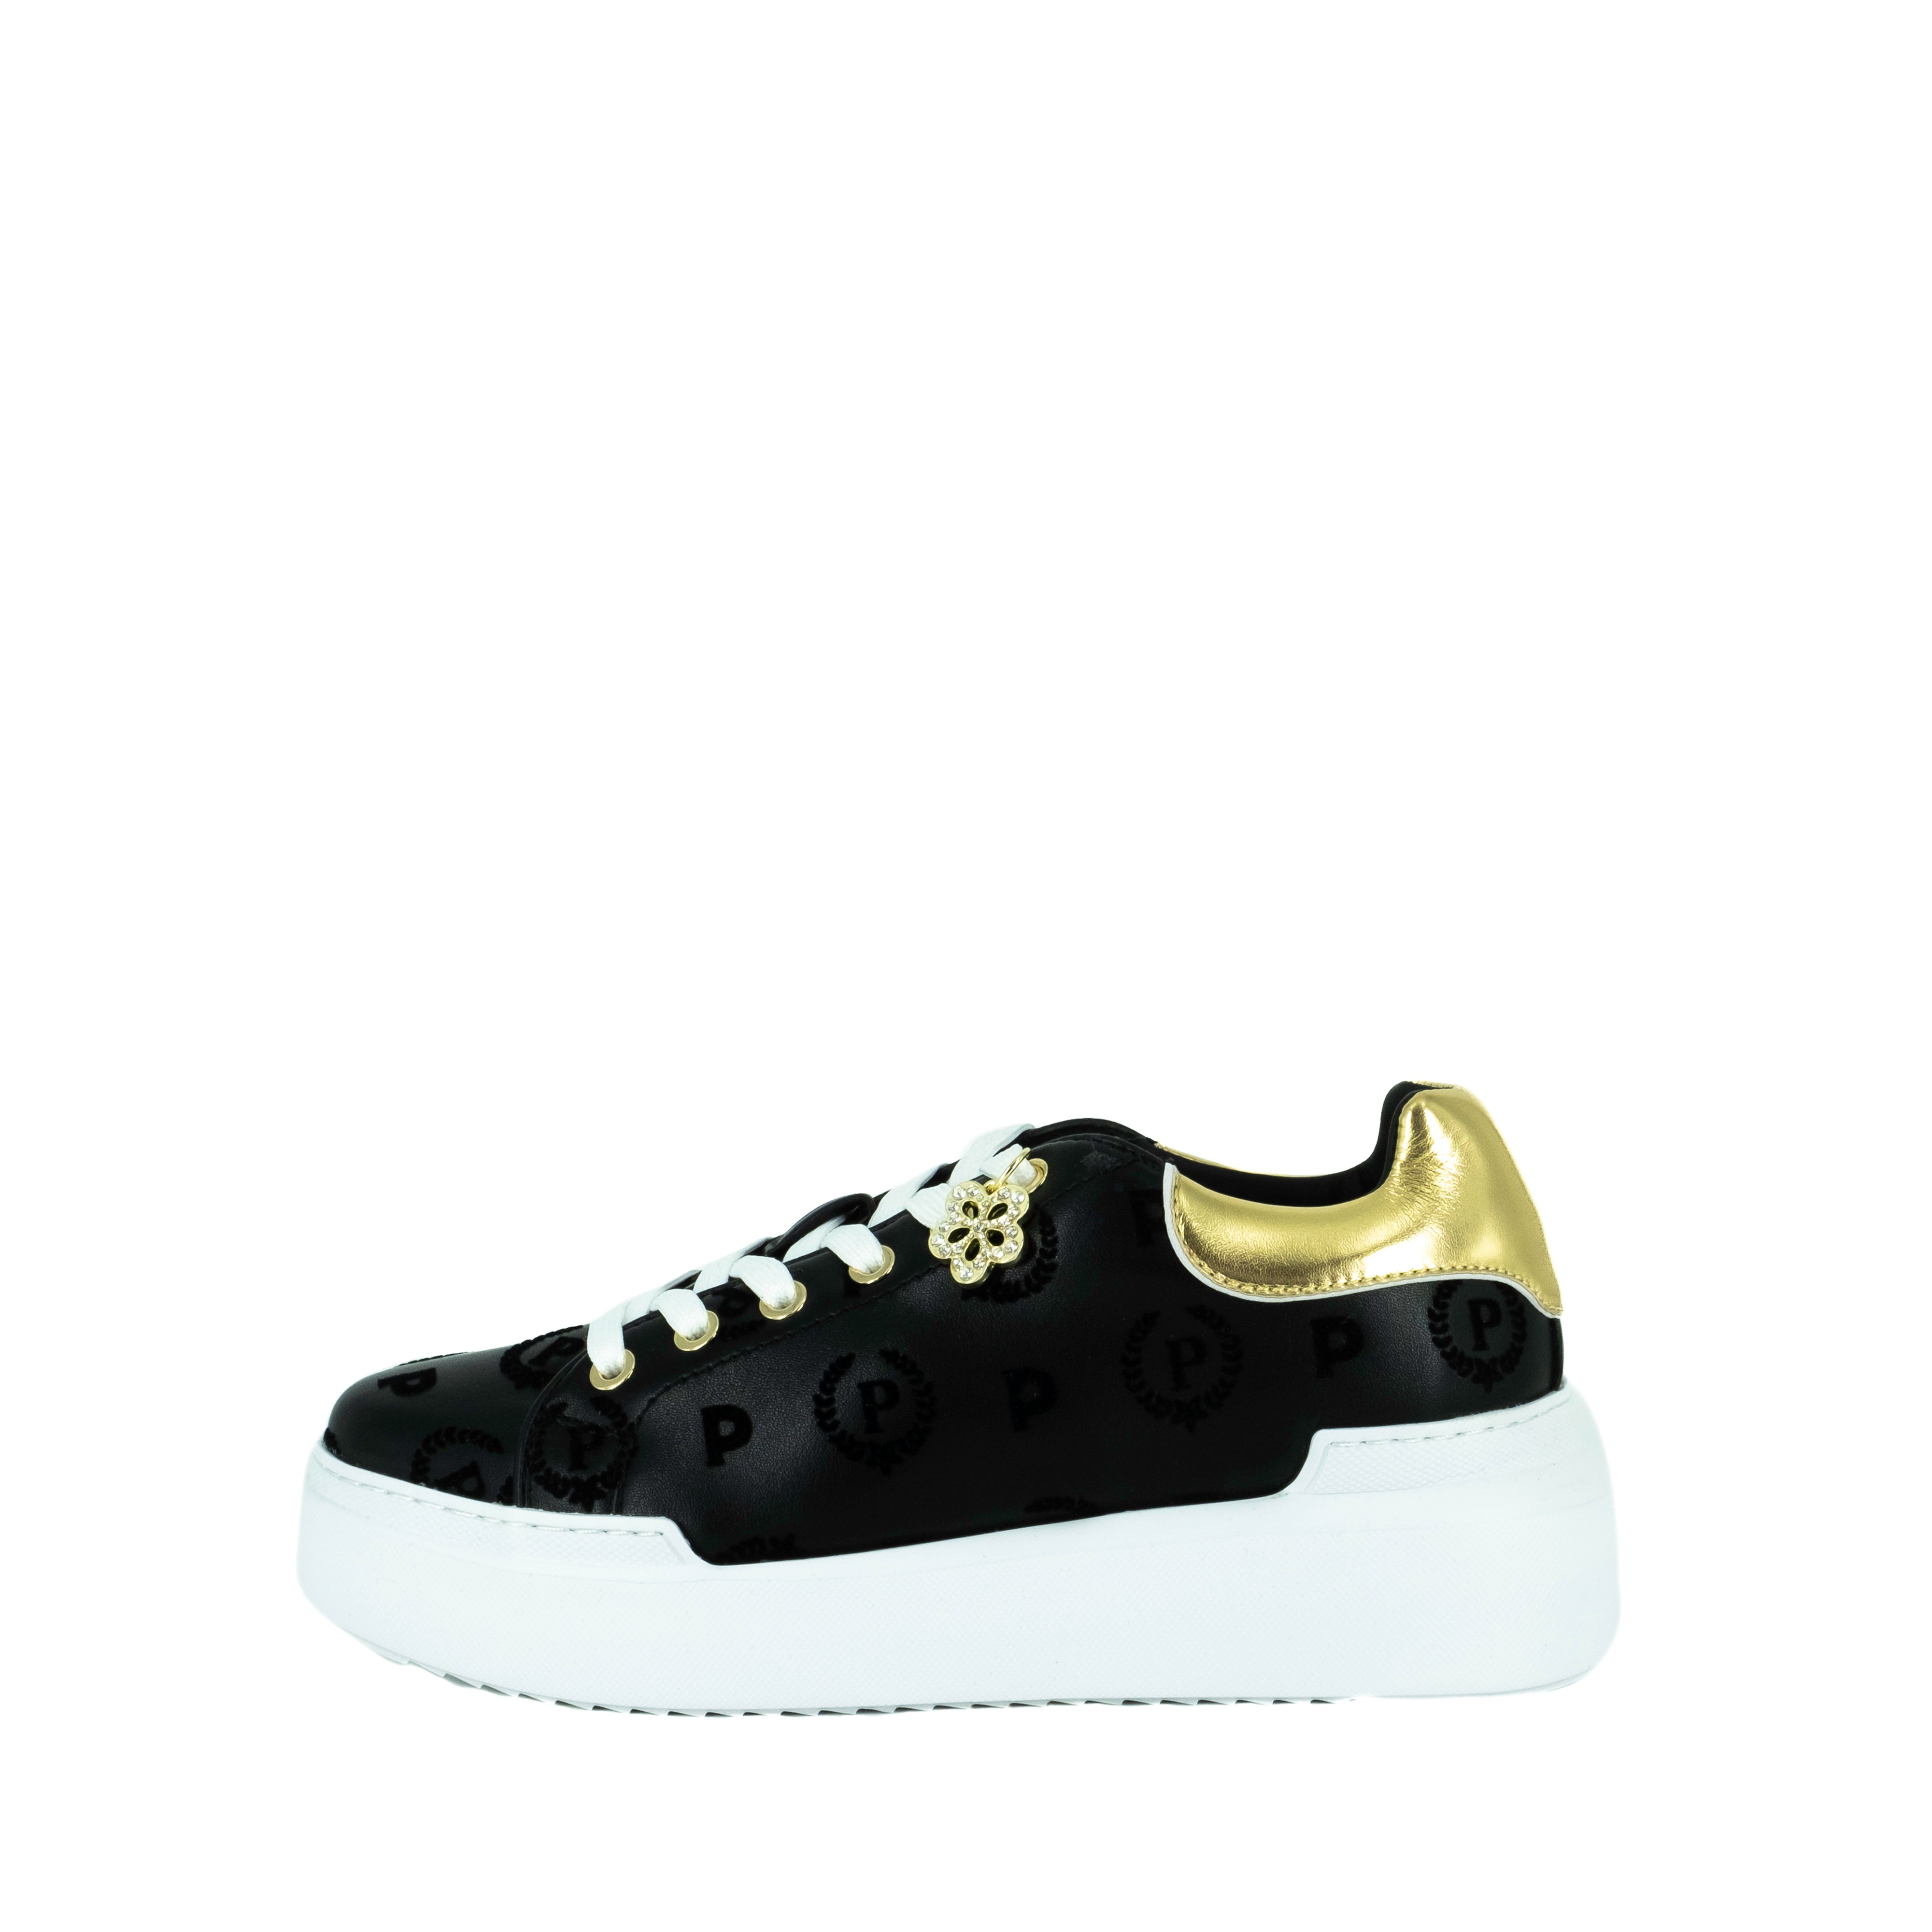 Pollini Women's Heritage Black Sneakers with Gold Details